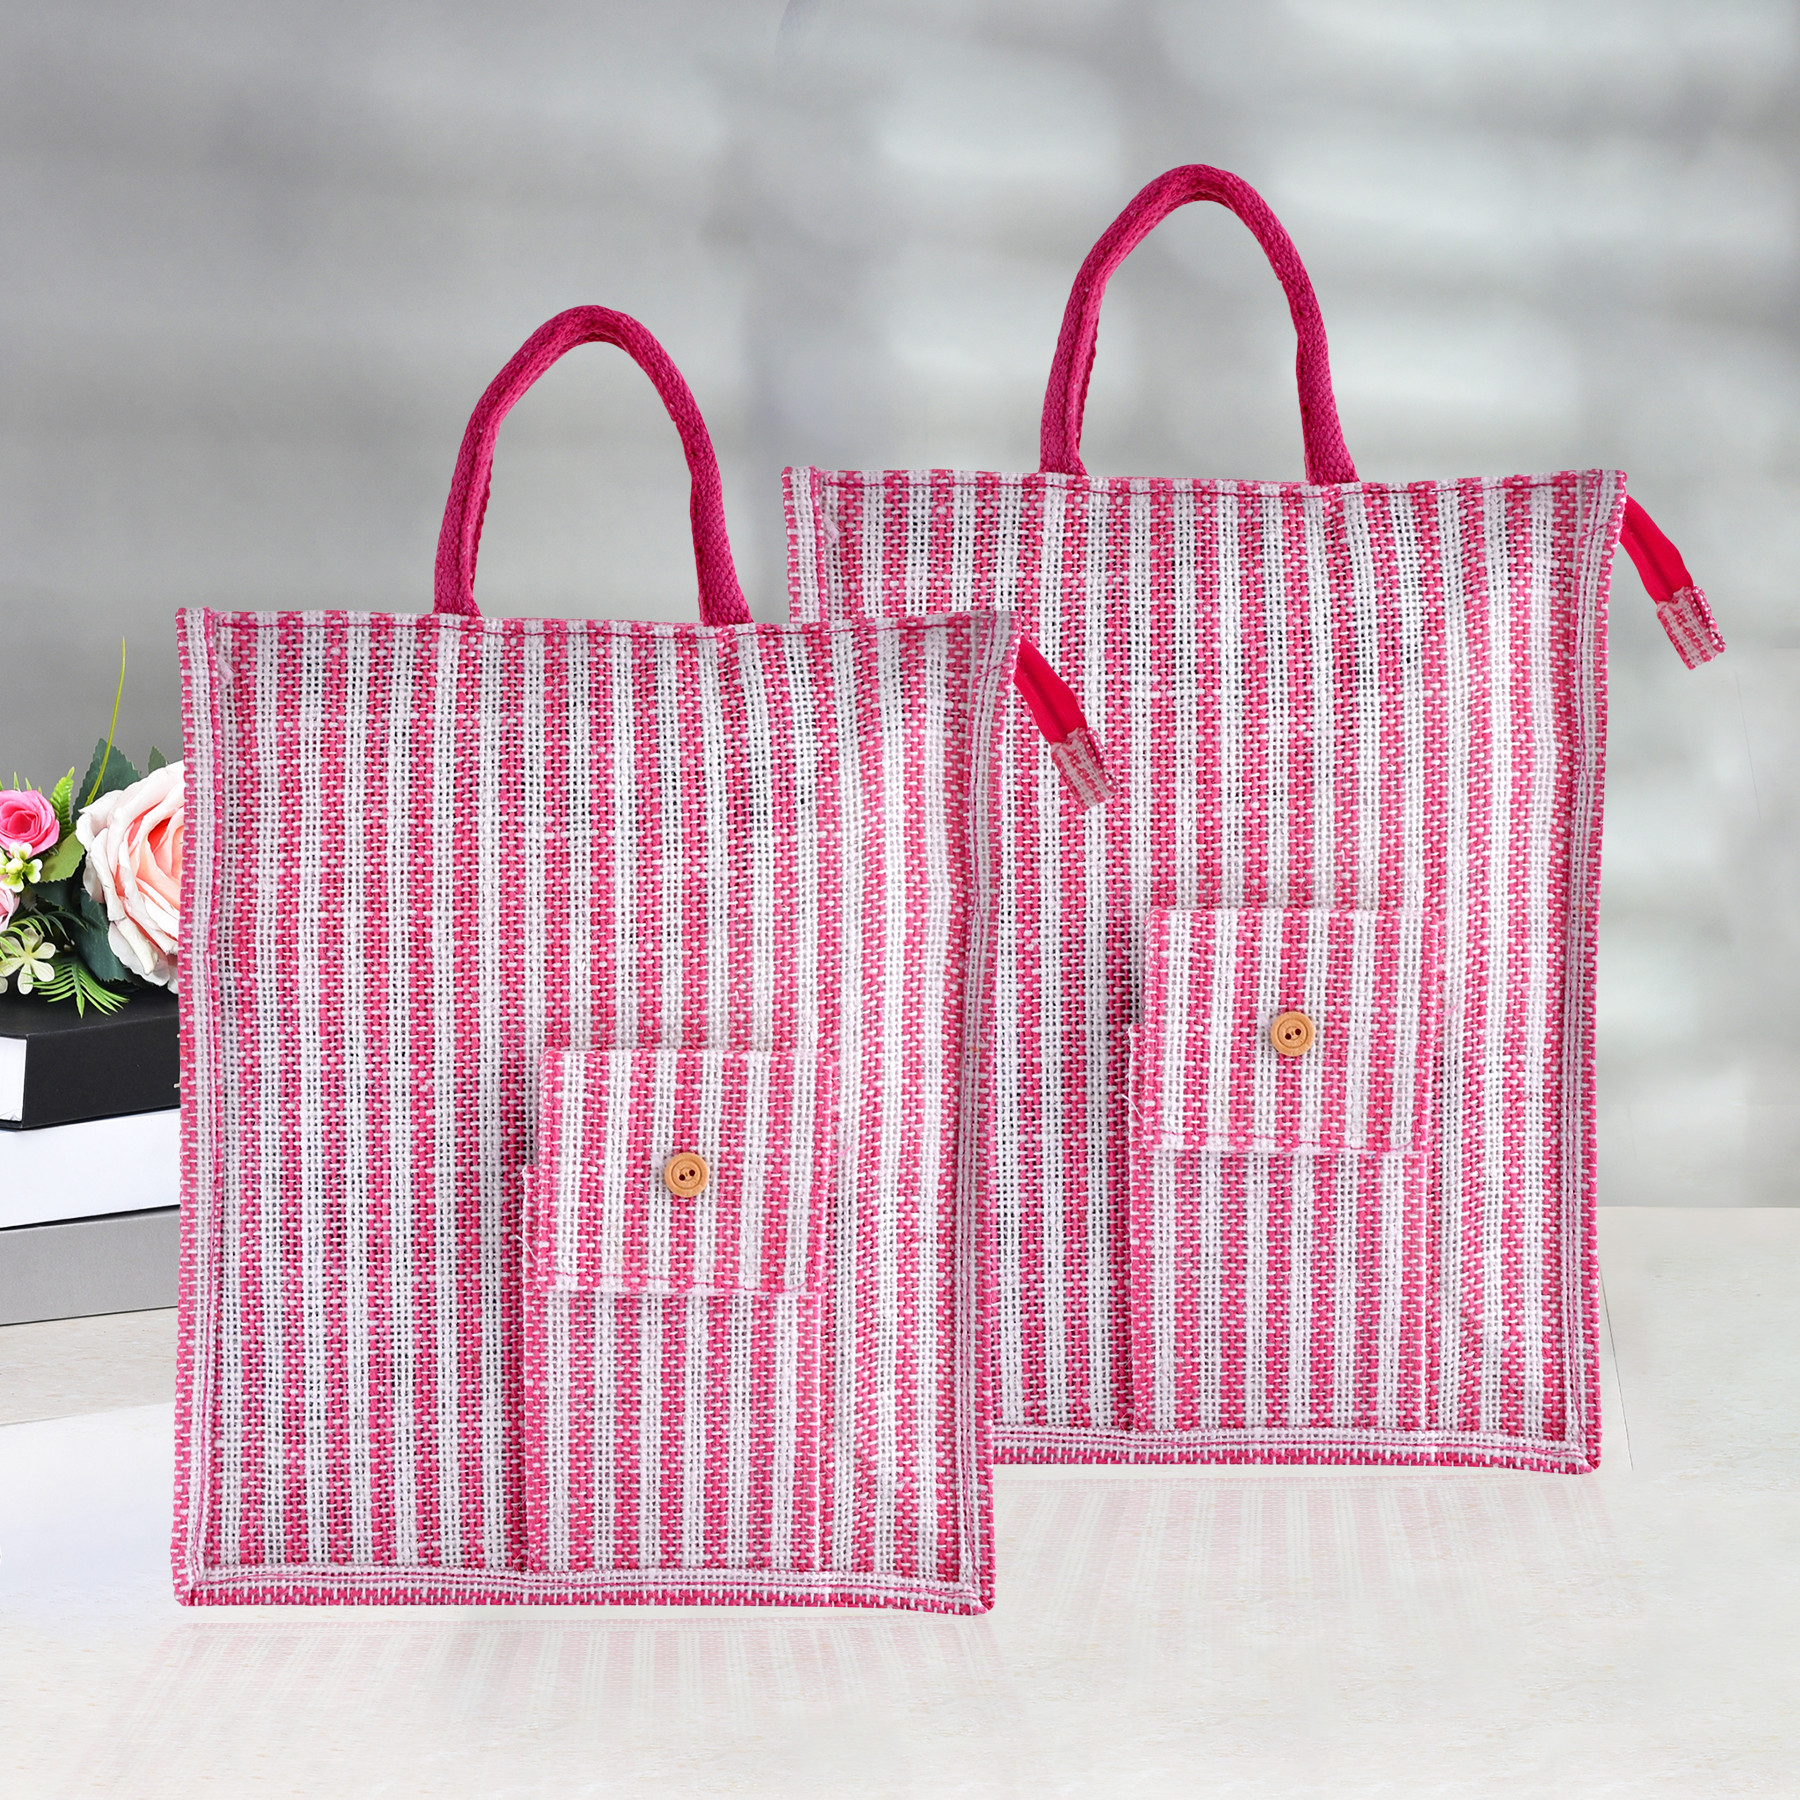 Kuber Industries Shopping Bag | Jute Carry Bag | Zipper Grocery Bag with Handle | Reusable Shopping Bag | Carrying Bag With Front Pocket | Lining-Grocery Bag | Medium | Pink